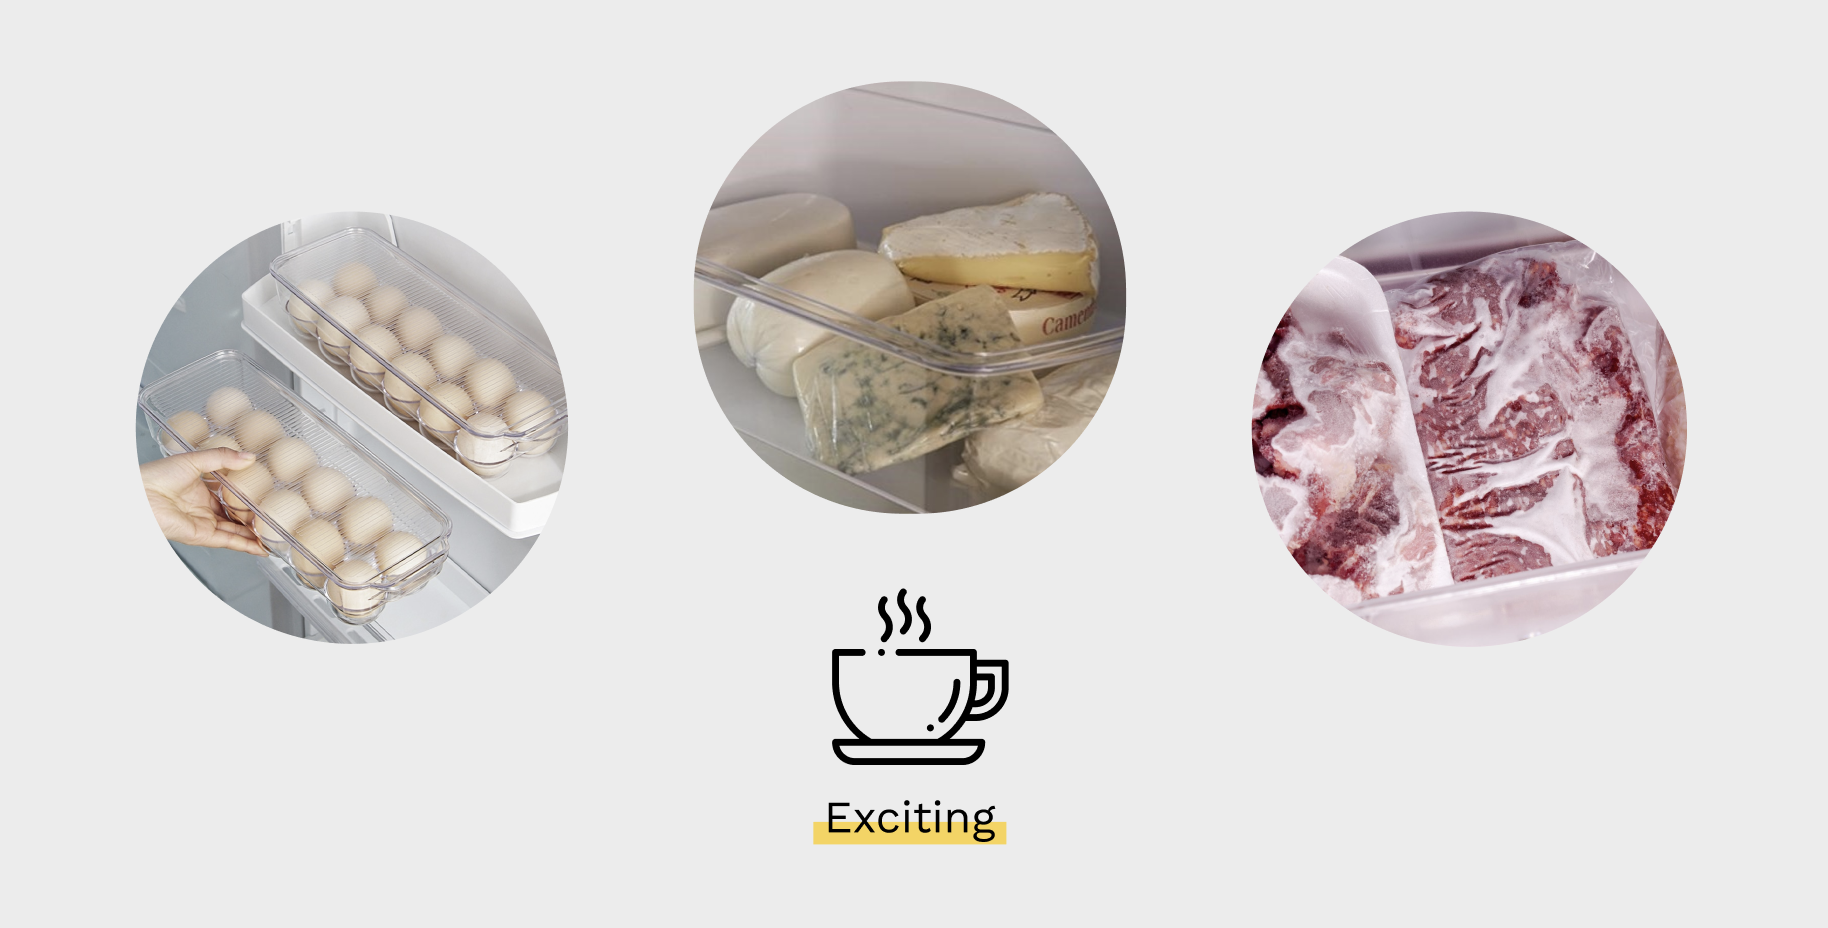  The coffee shop is the cheese container. In a shared fridge, it’s a place where you’re often surprised by your flatmates’ taste. Cheese can be eaten as a quick meal or shared as an extravagant cheese platter. Just like the coffee shop, where both in